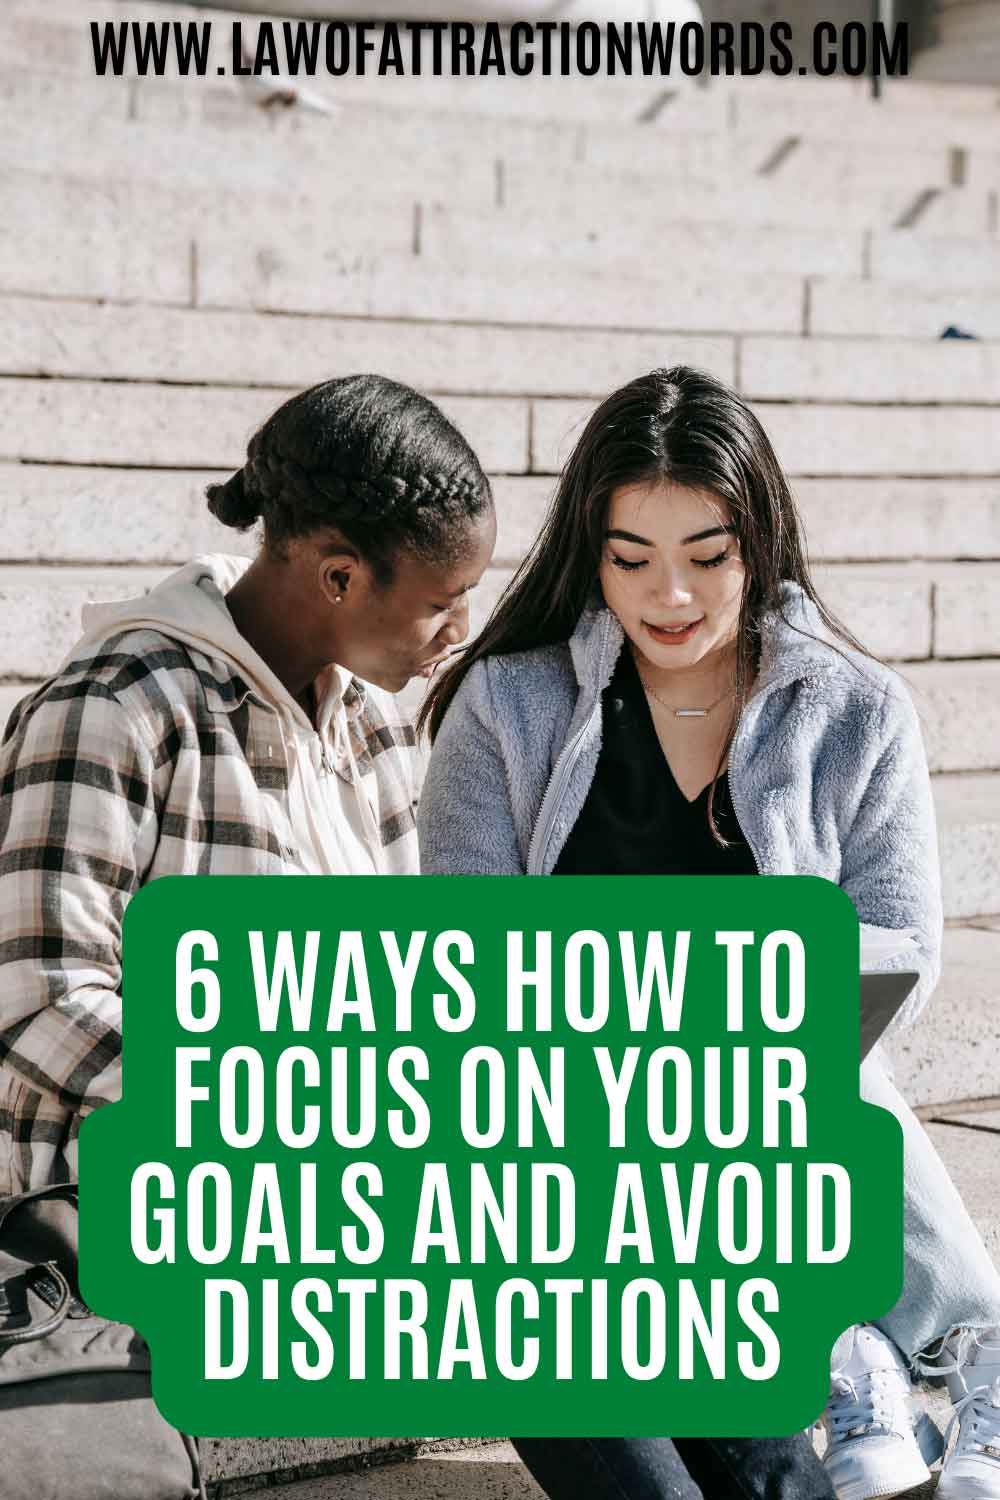 How To Focus On Your Goals and Avoid Distractions